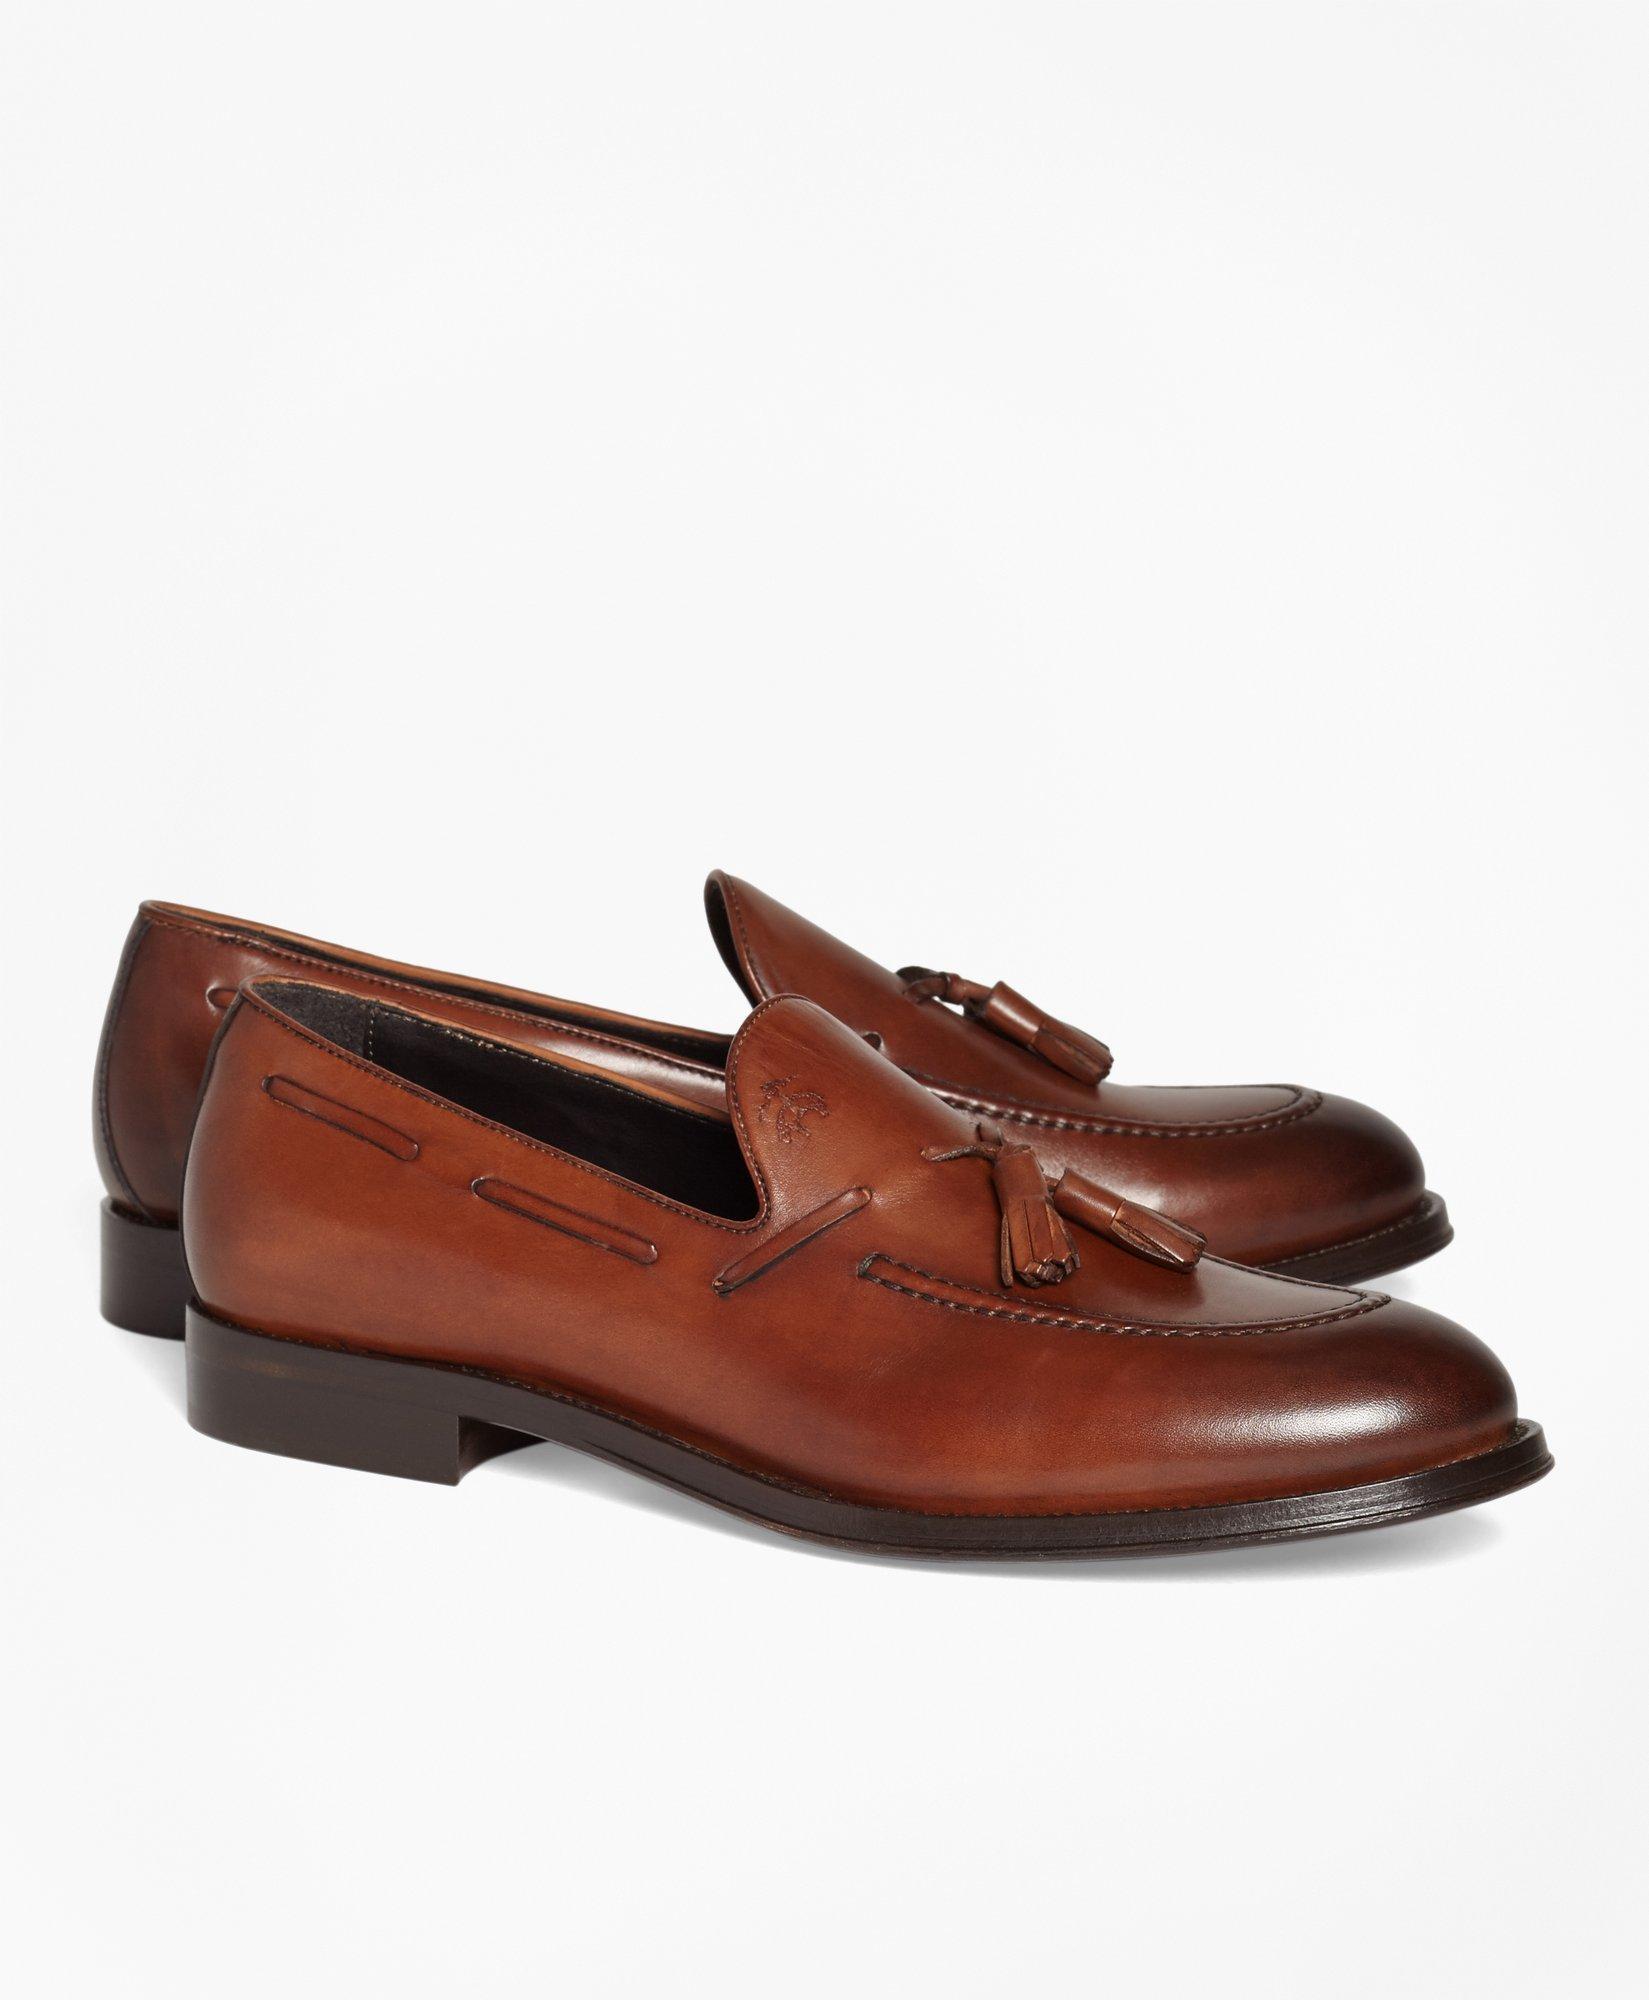 Brooks Brothers 1818 Footwear Leather Tassel Loafers | Cognac | Size 8 D